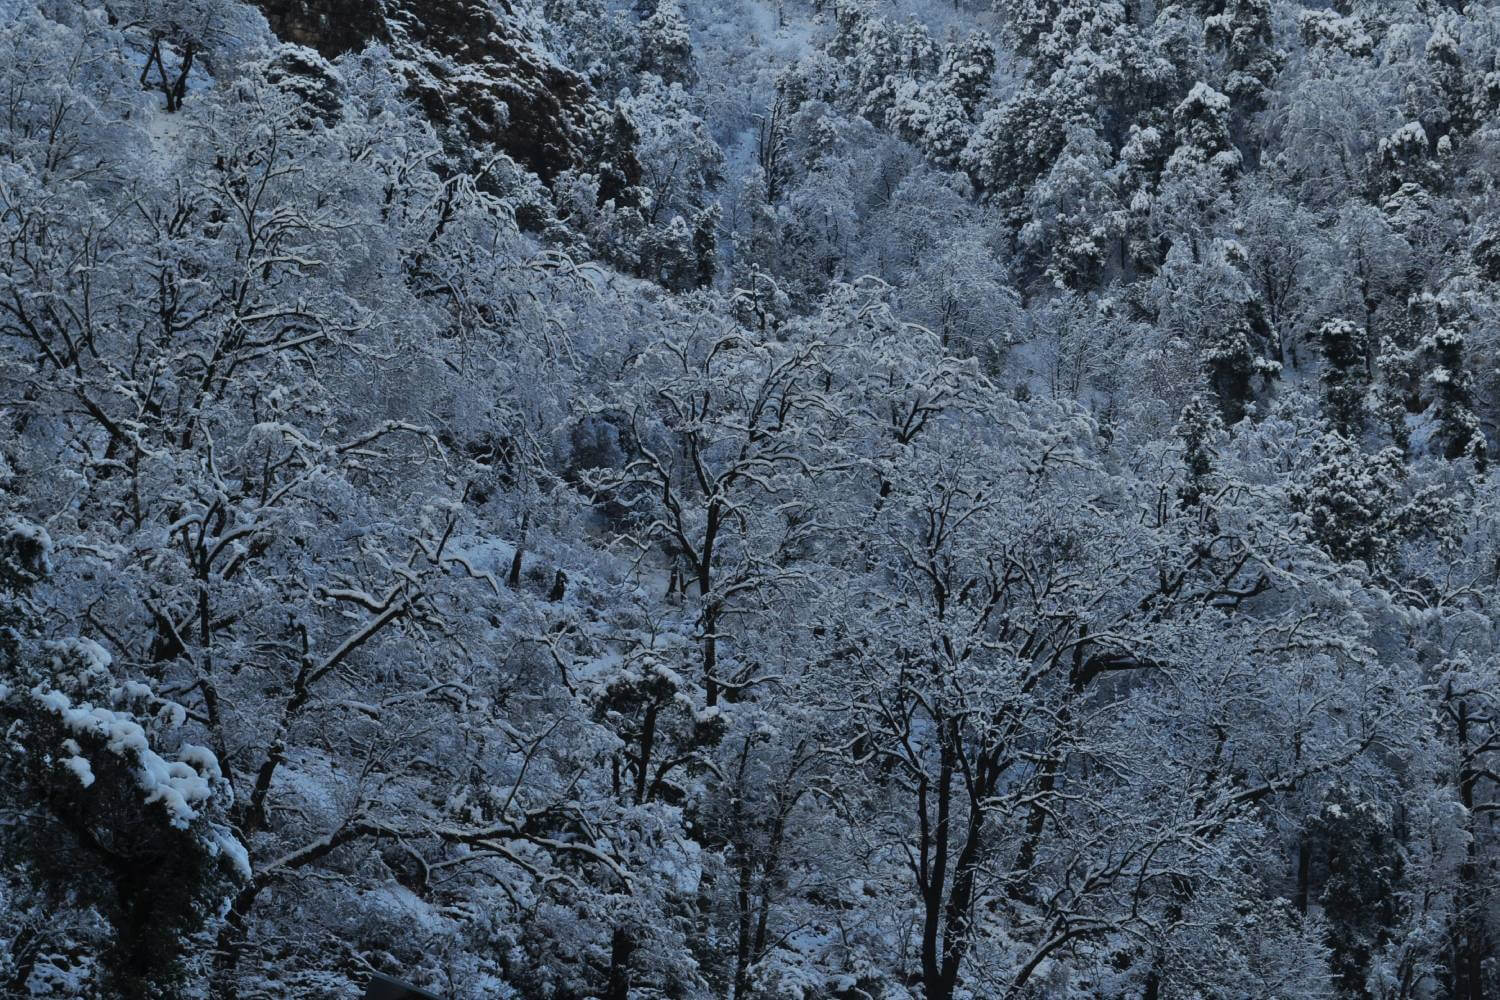 Dodital Forests in Winter